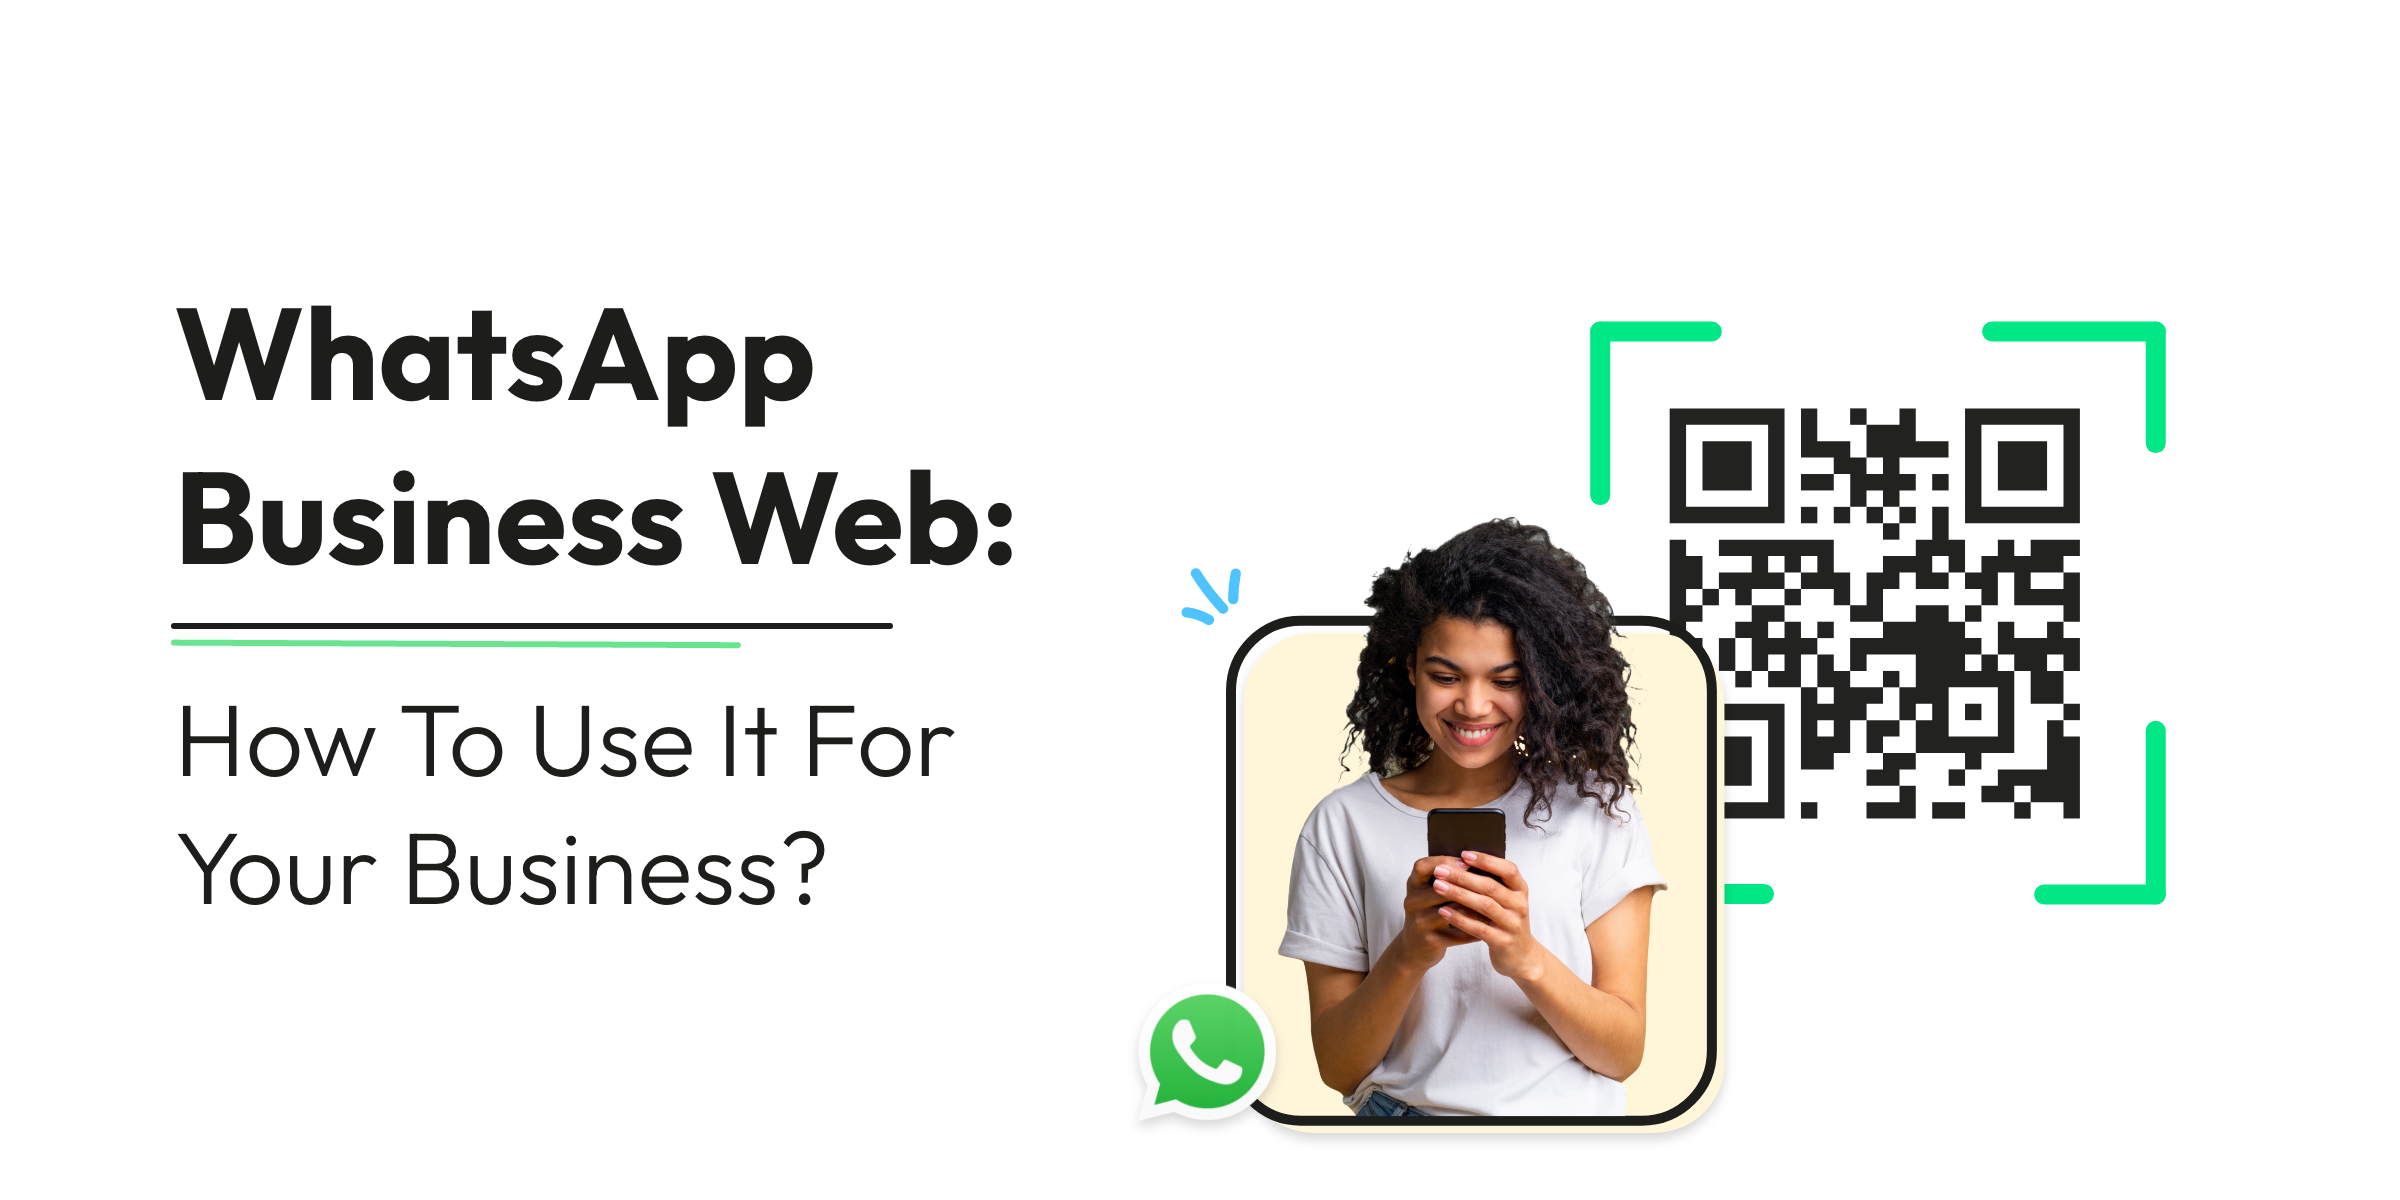 WhatsApp Business Web: How to use it for your business in 2023?